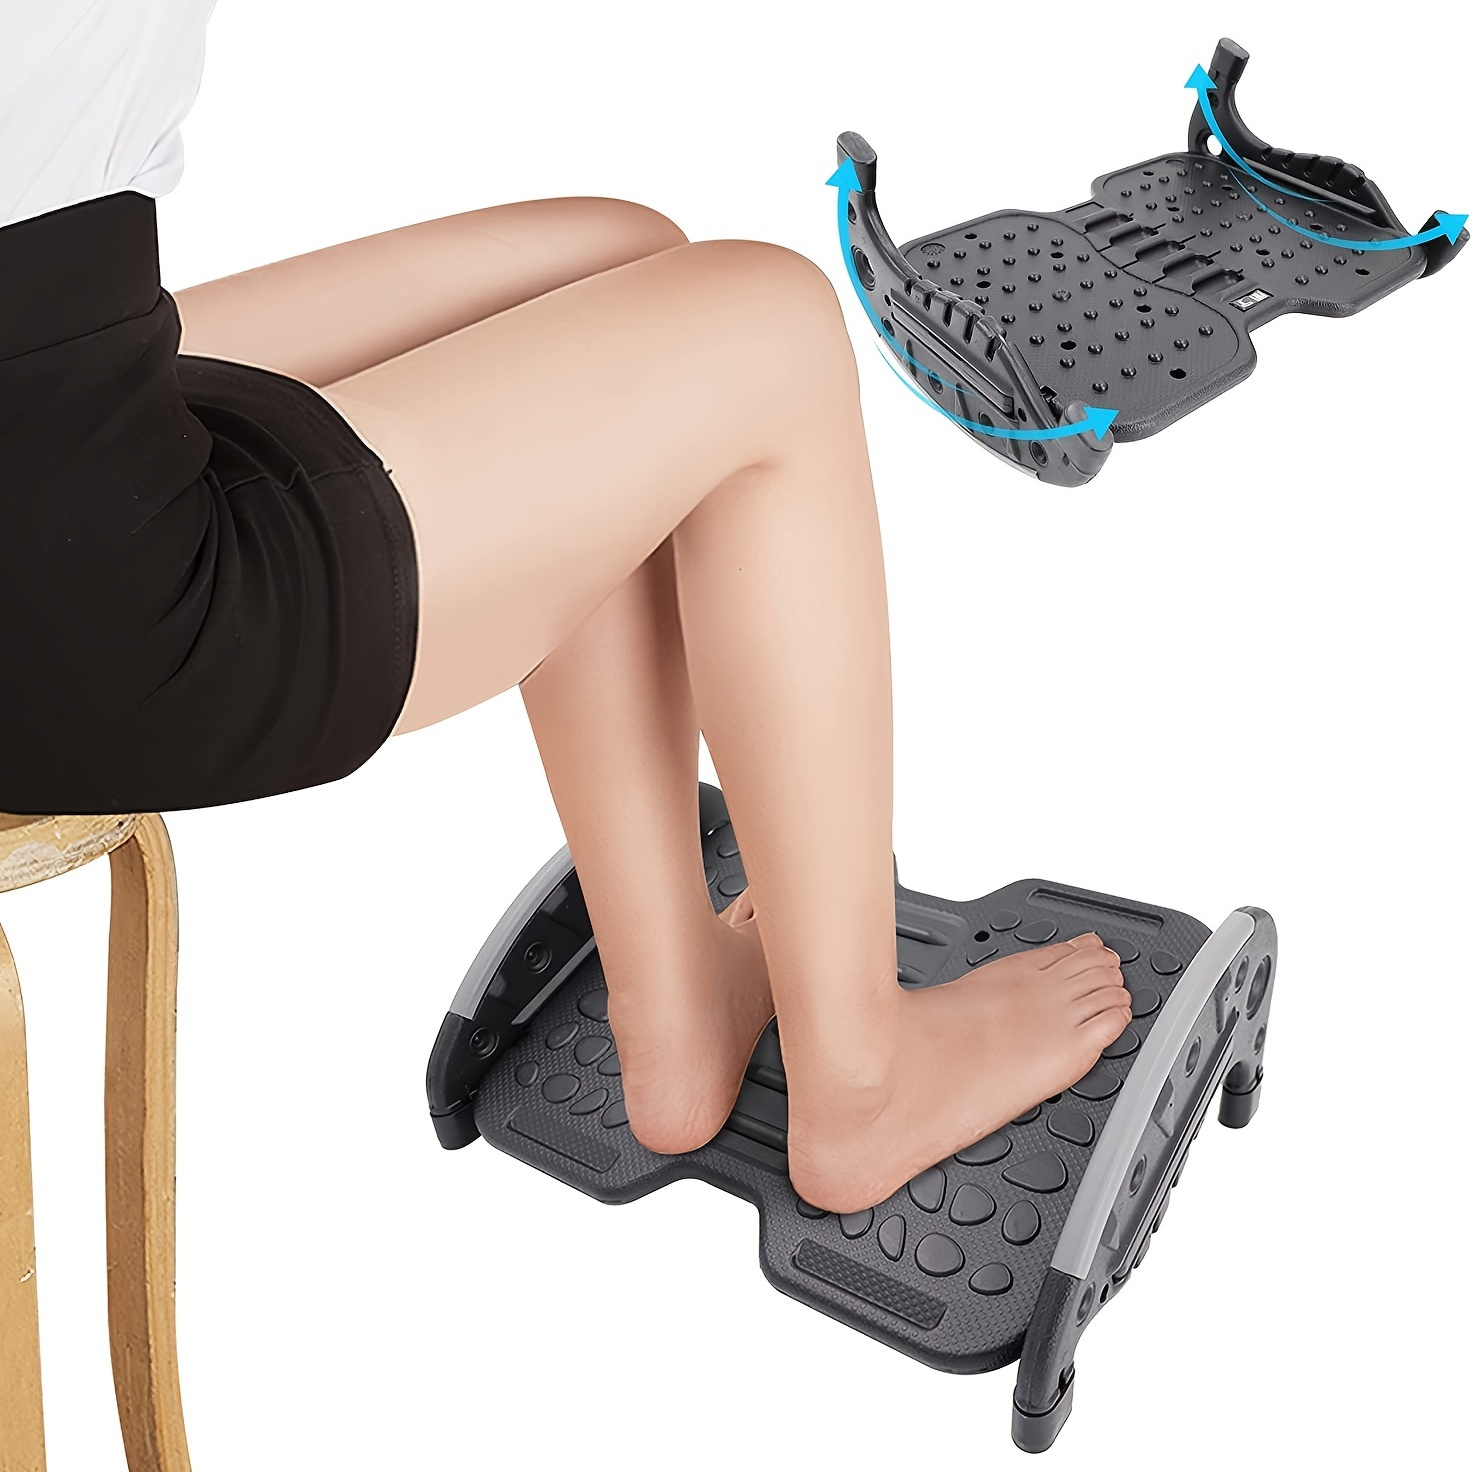  Slant Board for Calf Stretching, Adjustable 8 Level Non-Slip  Balance Board,Under Desk Footrest with Massage,Office Foot Rest for Under  Desk at Work,Multi-Functional Stretchers for Ankles and Legs : Office  Products